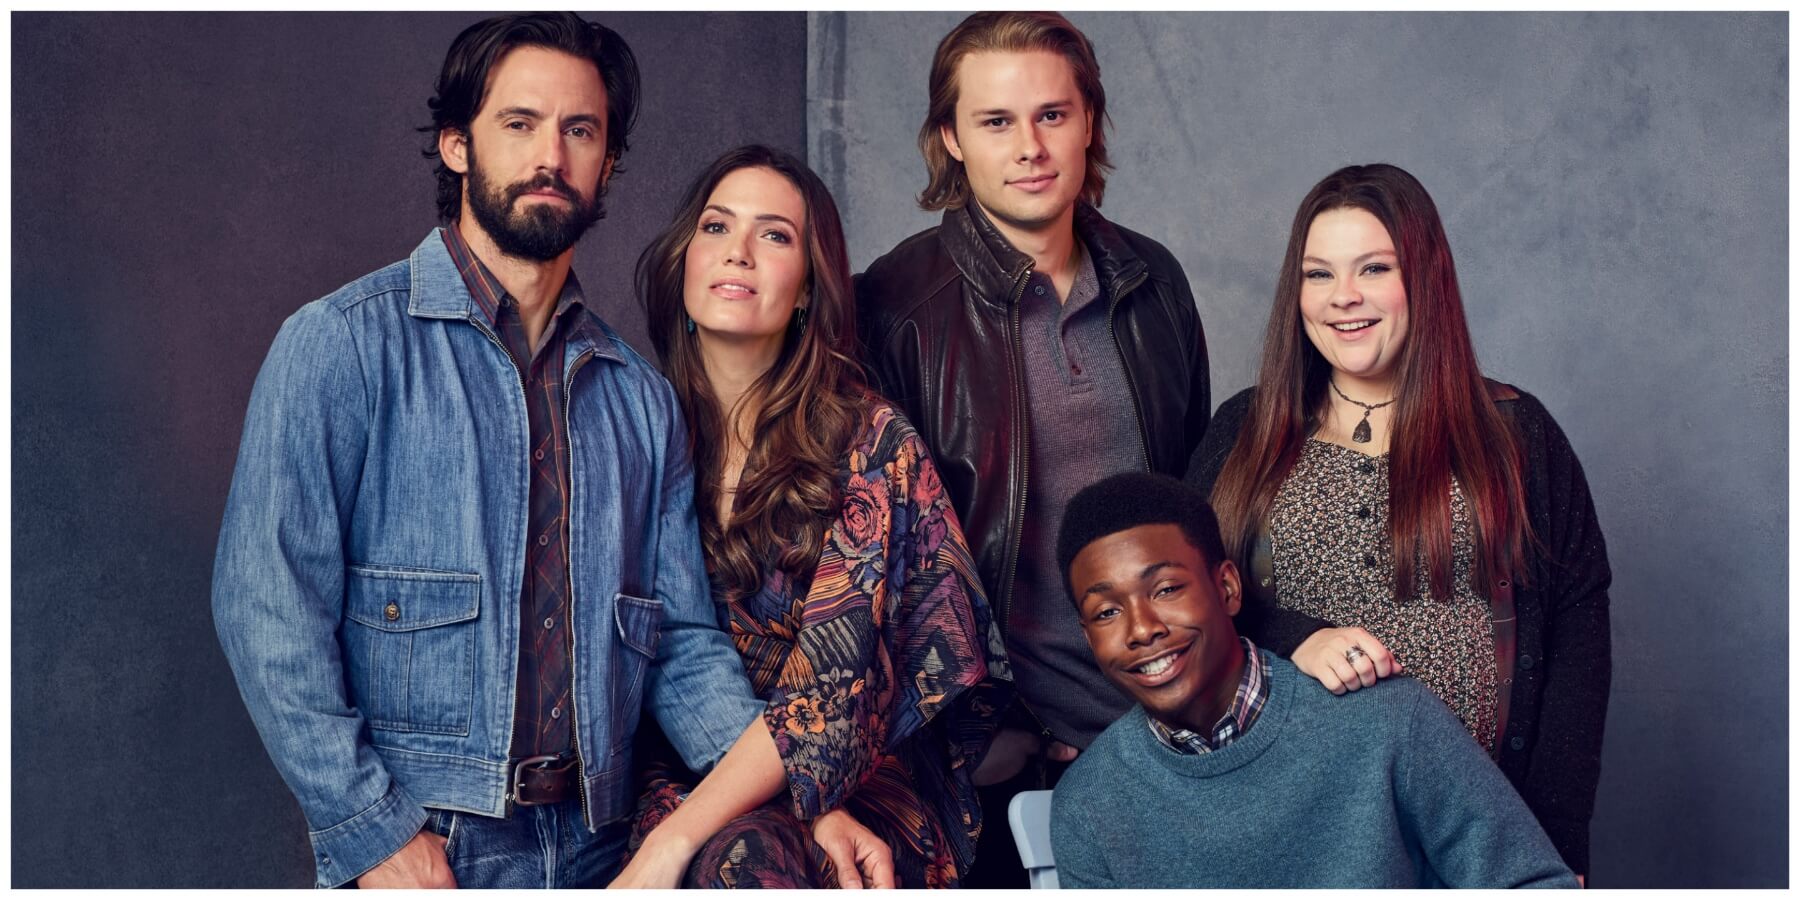 Milo Ventimglia, Mandy Moore, Logan Shroyer, Hanna Ziele and Niles Fitch were cast members on 'This Is Us'